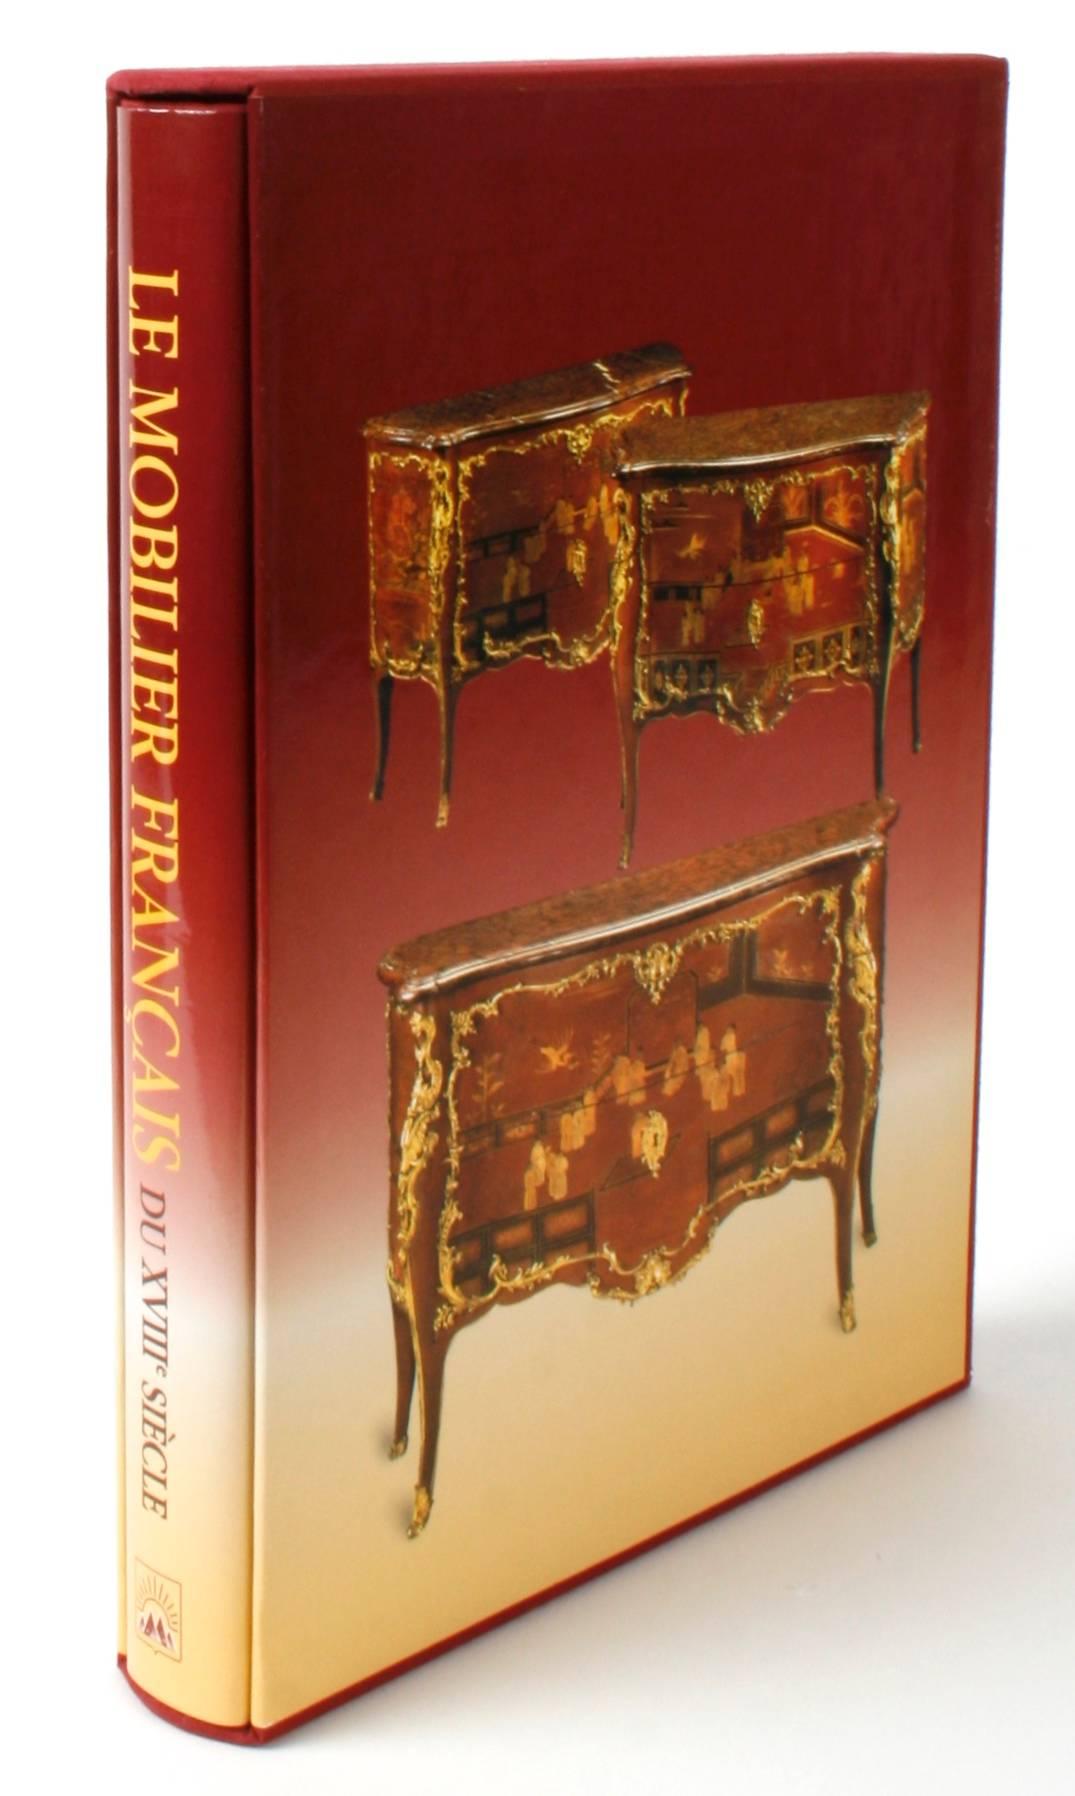 Le Mobilier Francais du XVIII Siecle by Giacomo Wannenes. Bocca Editori, Milano, 1998. 1st limited Edition (439/1200) hardcover with dust jacket and slipcase. 18th c French Furniture: A collector's guide to French furniture of the 18th c.